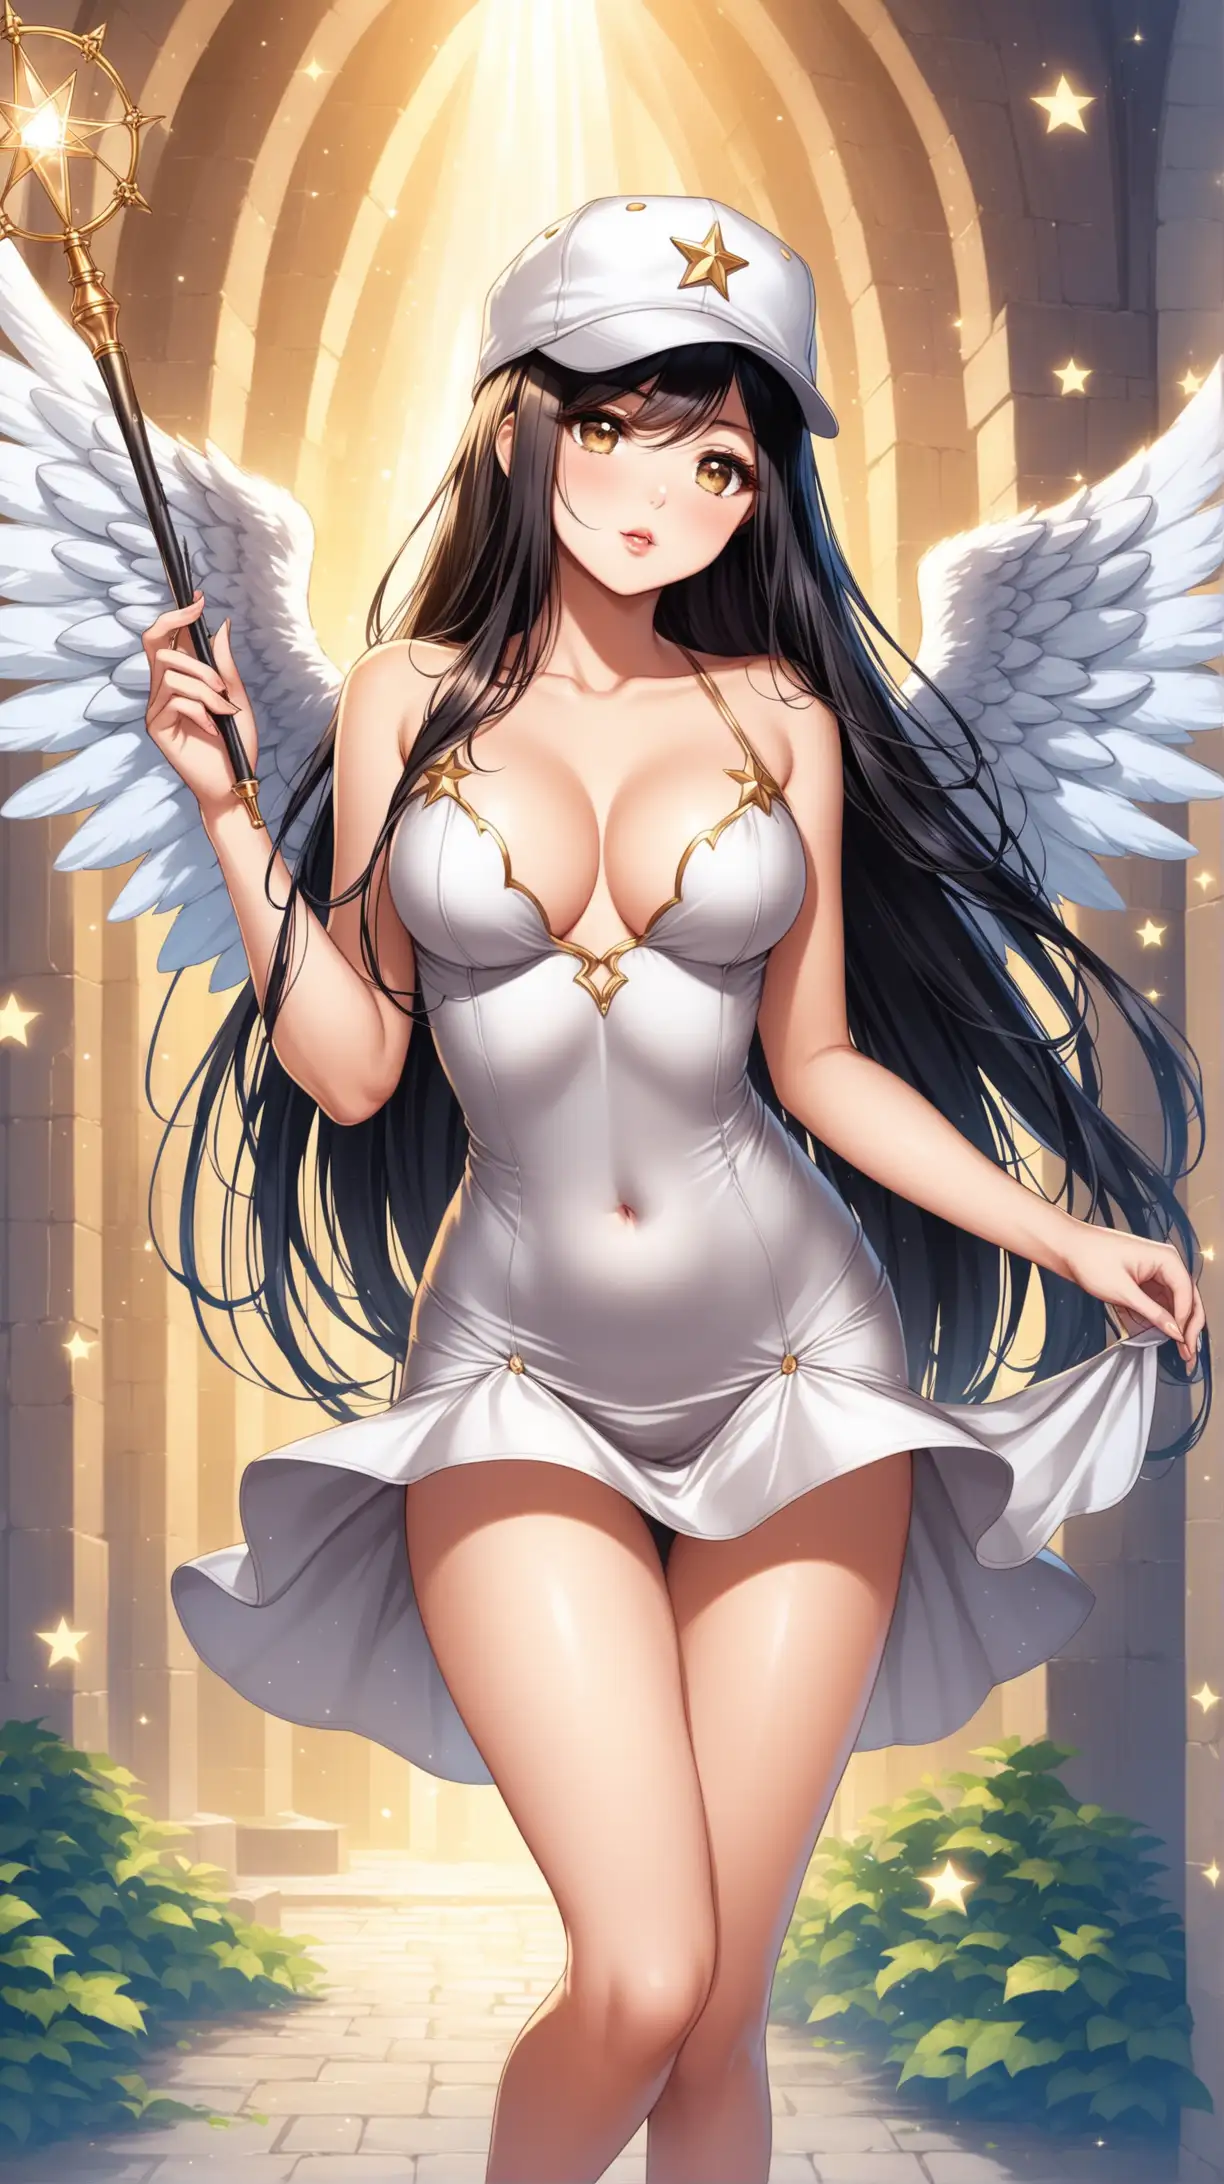 Sexy women wear a cap and carry wand, angel costume, playful, black long hair,light brown eye, grey short sexy dress, fantastic background .